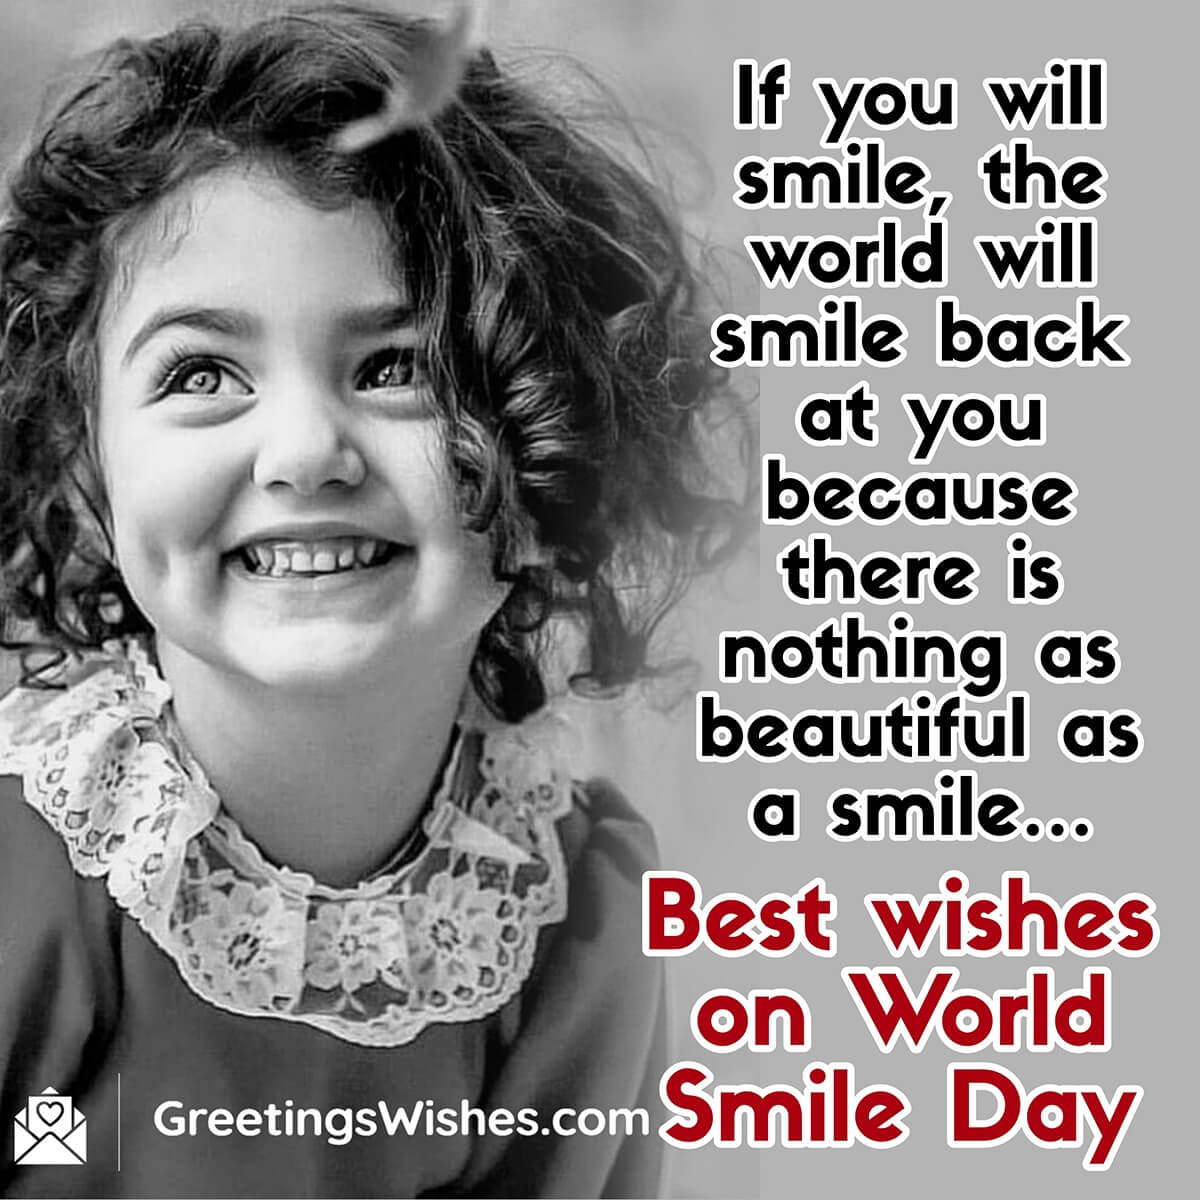 World Smile Day Wishes (6th October)